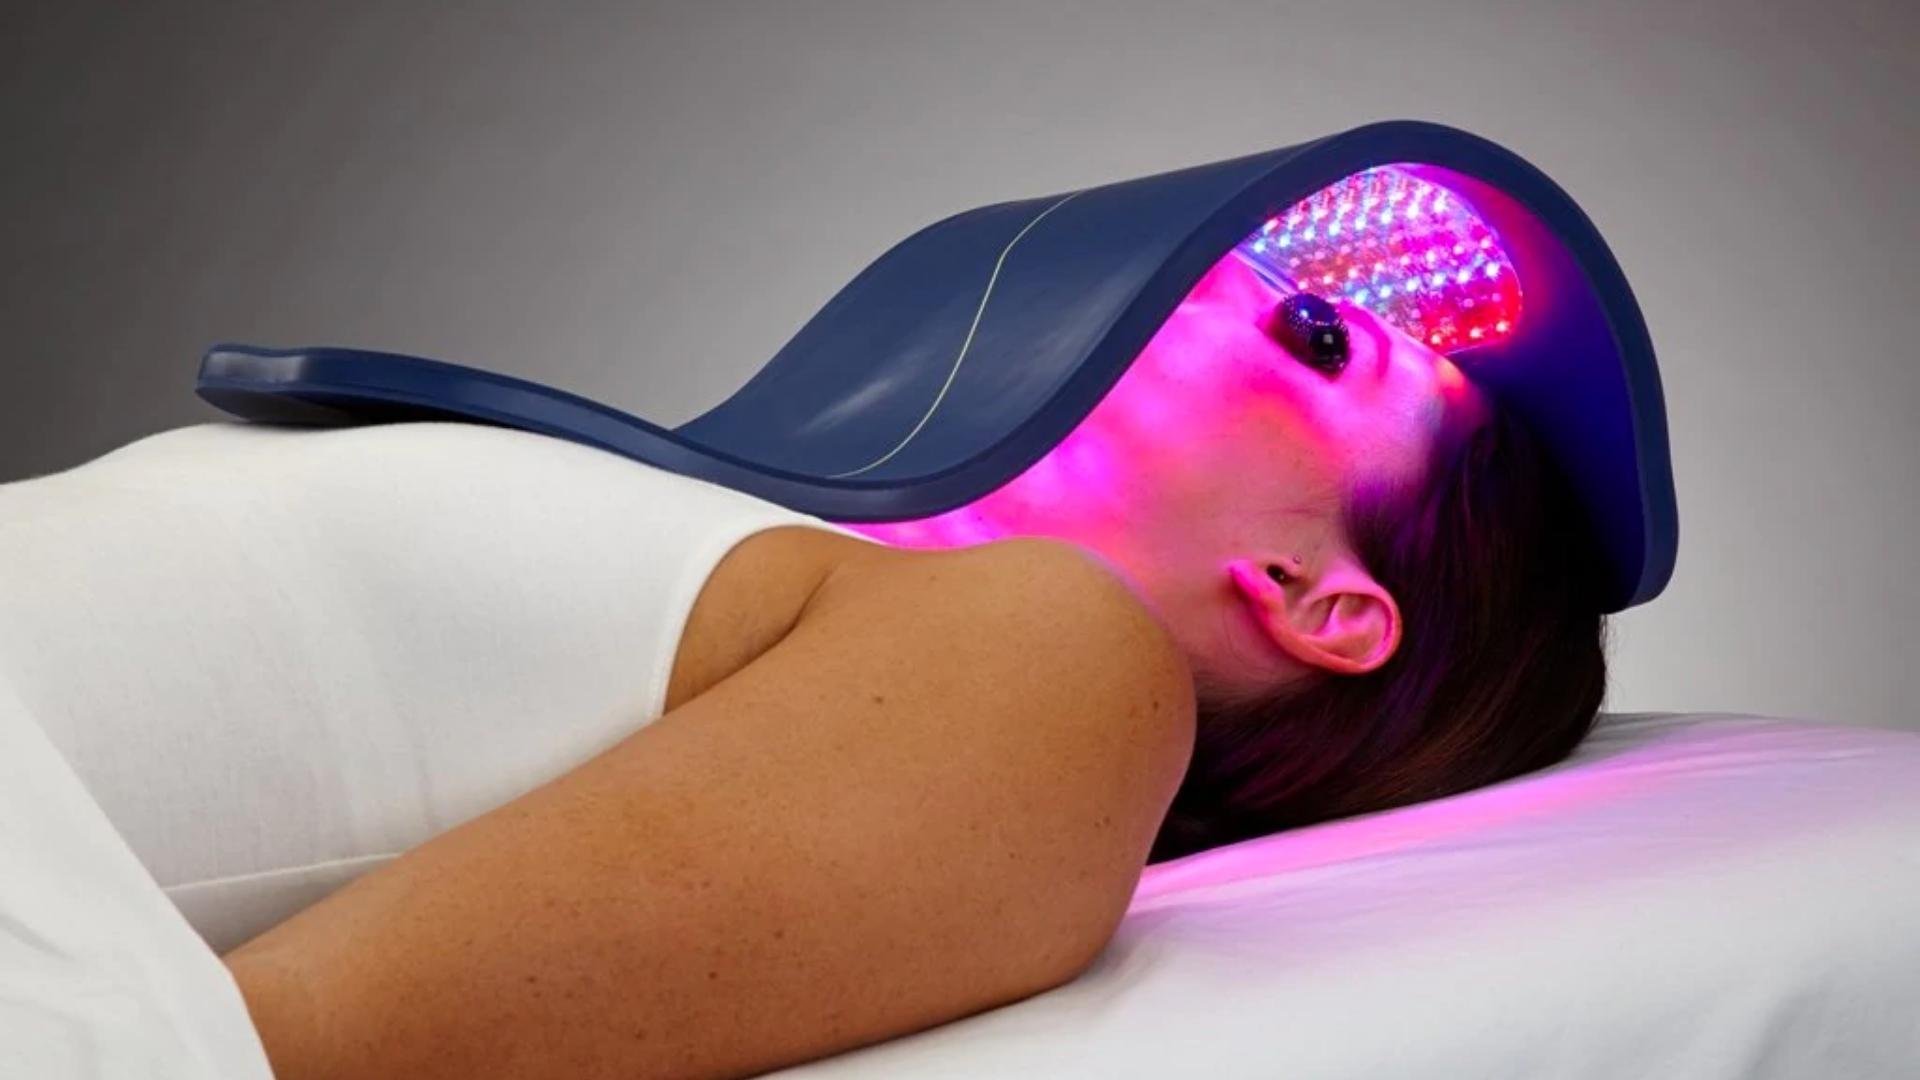 LED light therapy: What is it, and does it work?